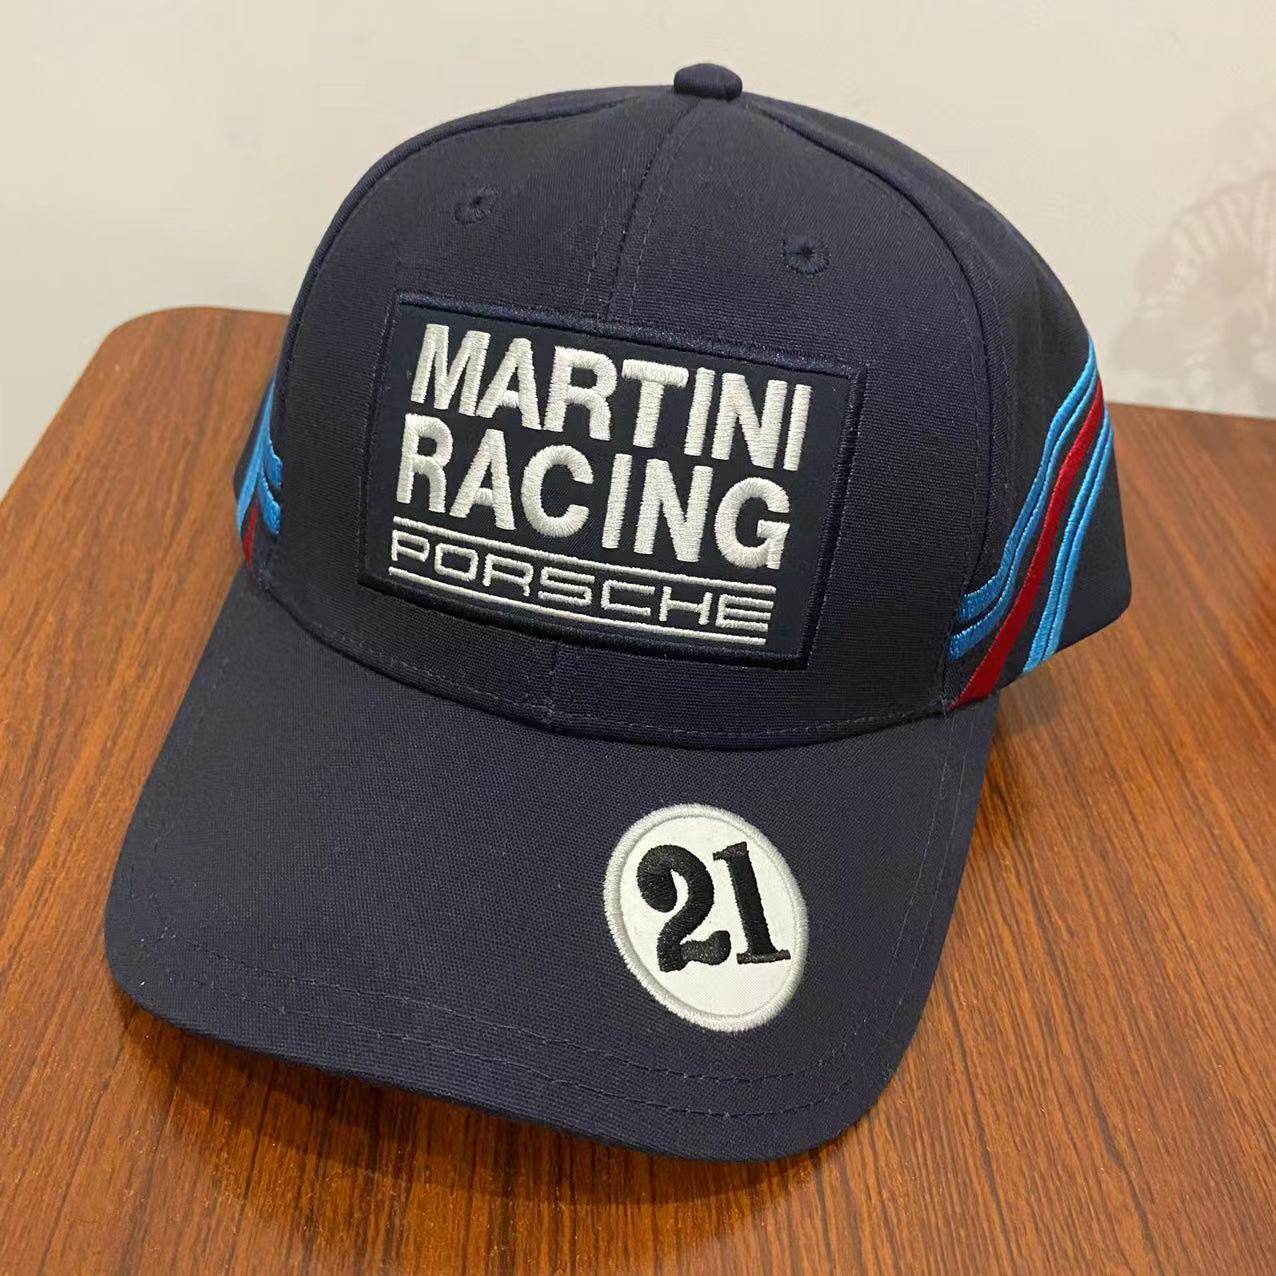 MARTINI Racing PORSCHE with lining 100% cotton